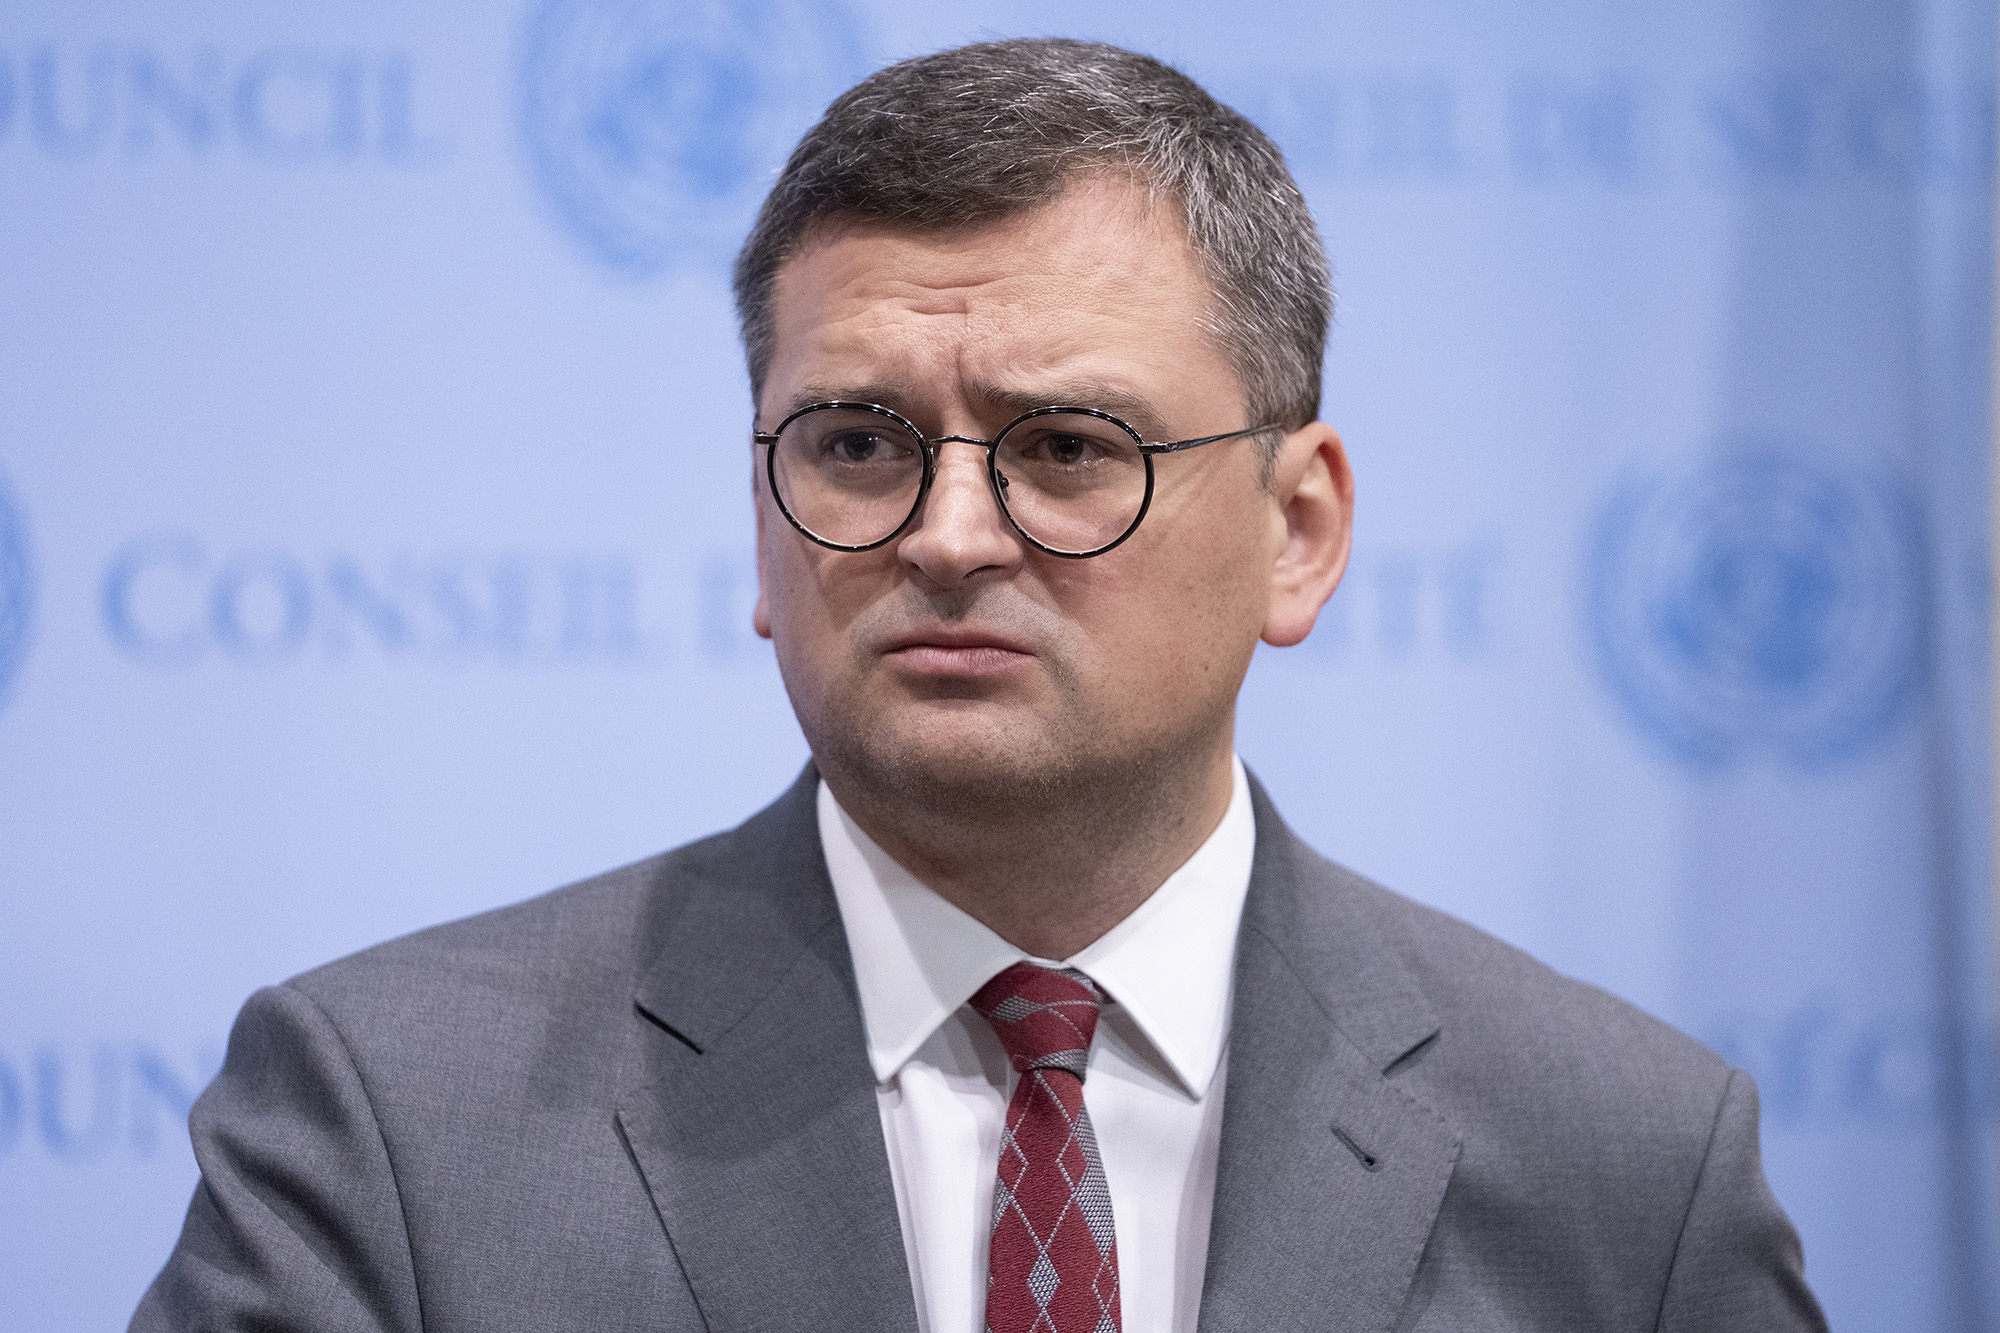 Minister of Foreign Affairs of Ukraine Dmytro Kuleba during the press conference ahead of Security Council meeting on situation in Ukraine at UN Headquarters, in New York, on September 22.